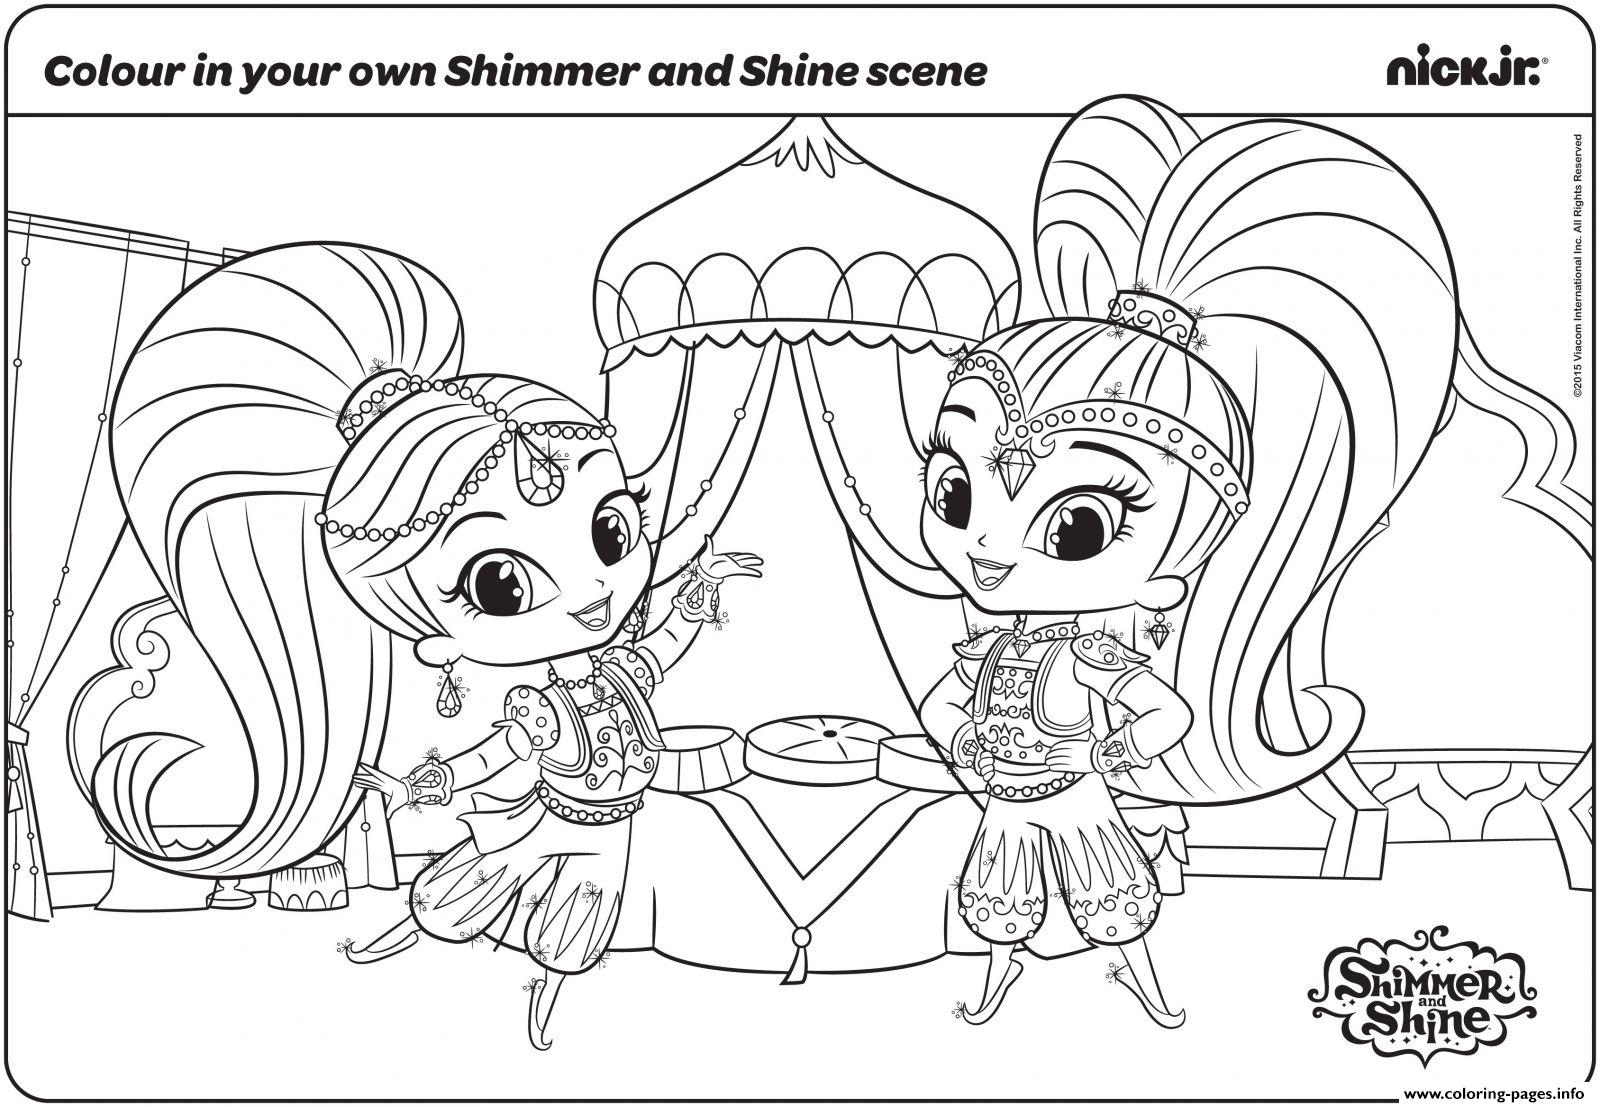 Shimmer And Shine Fun With Colouring Page coloring pages